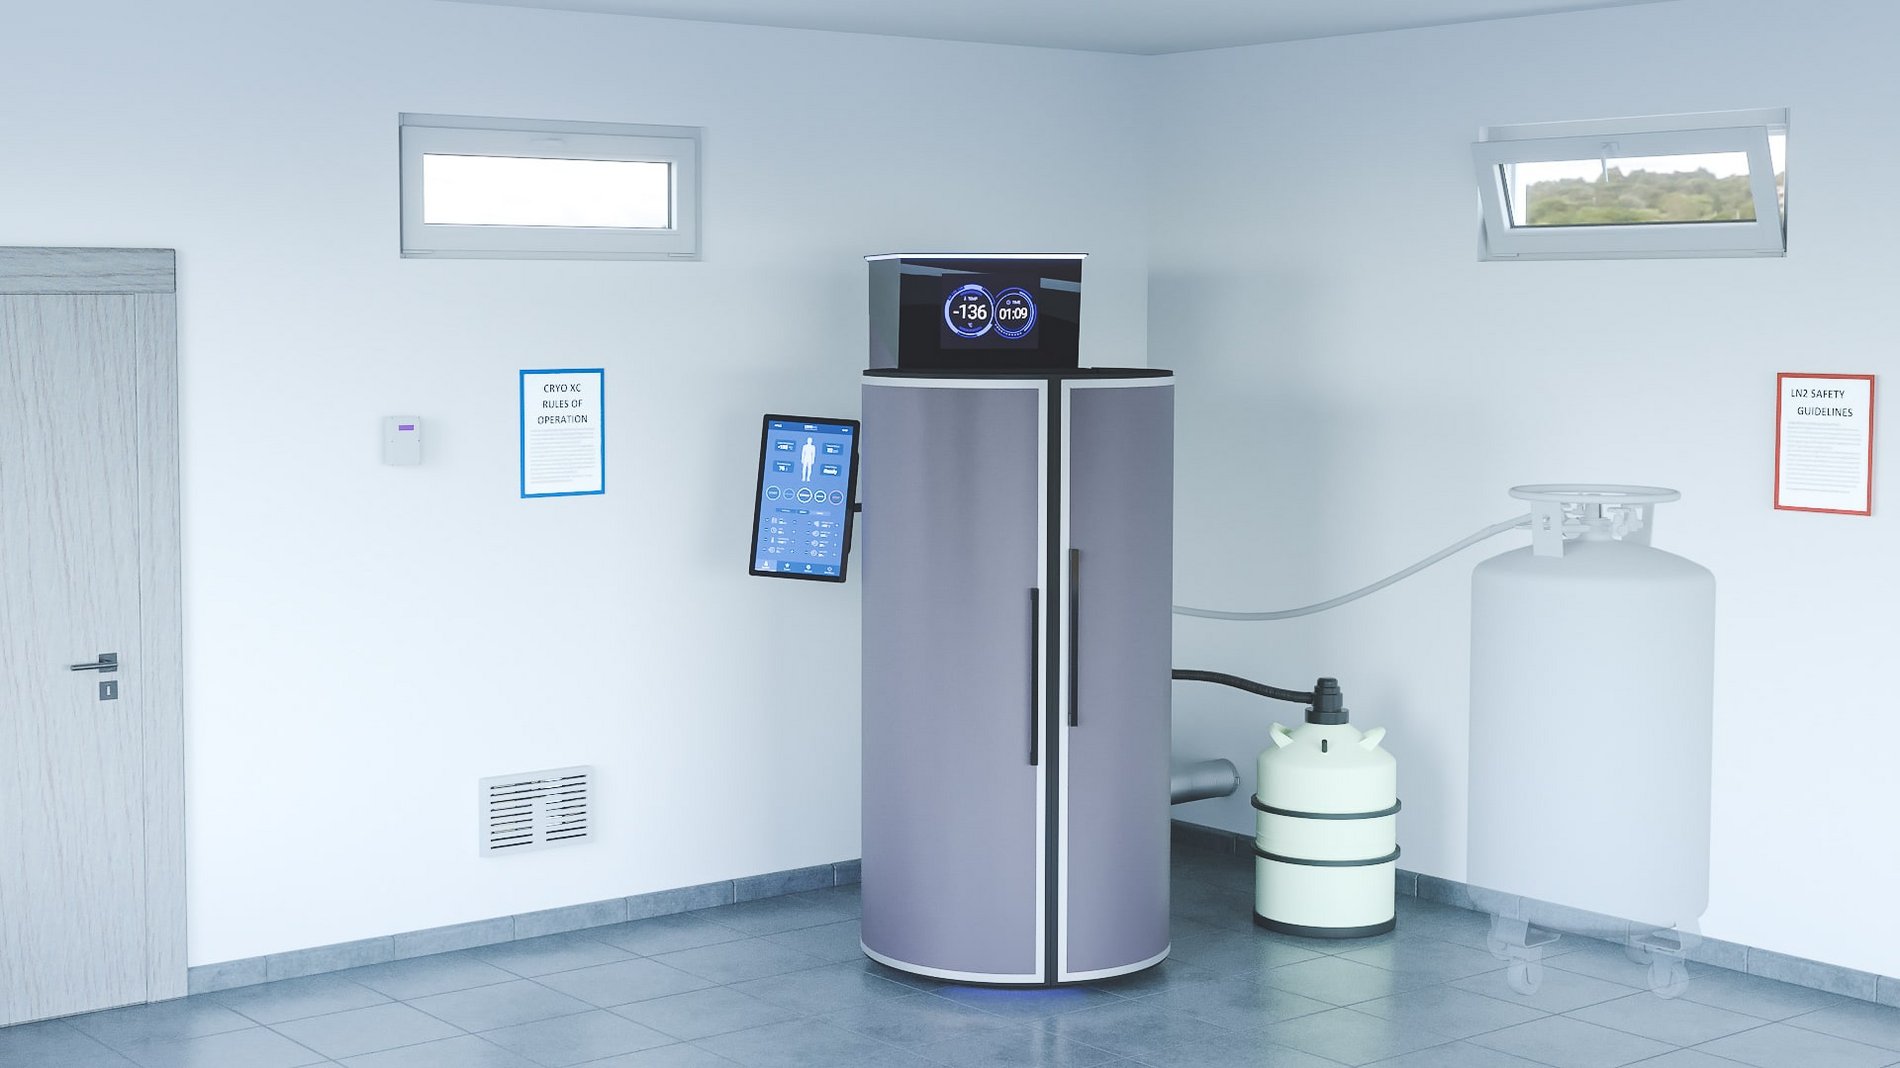 Cryotherapy room setup with non-pressurized dewar system